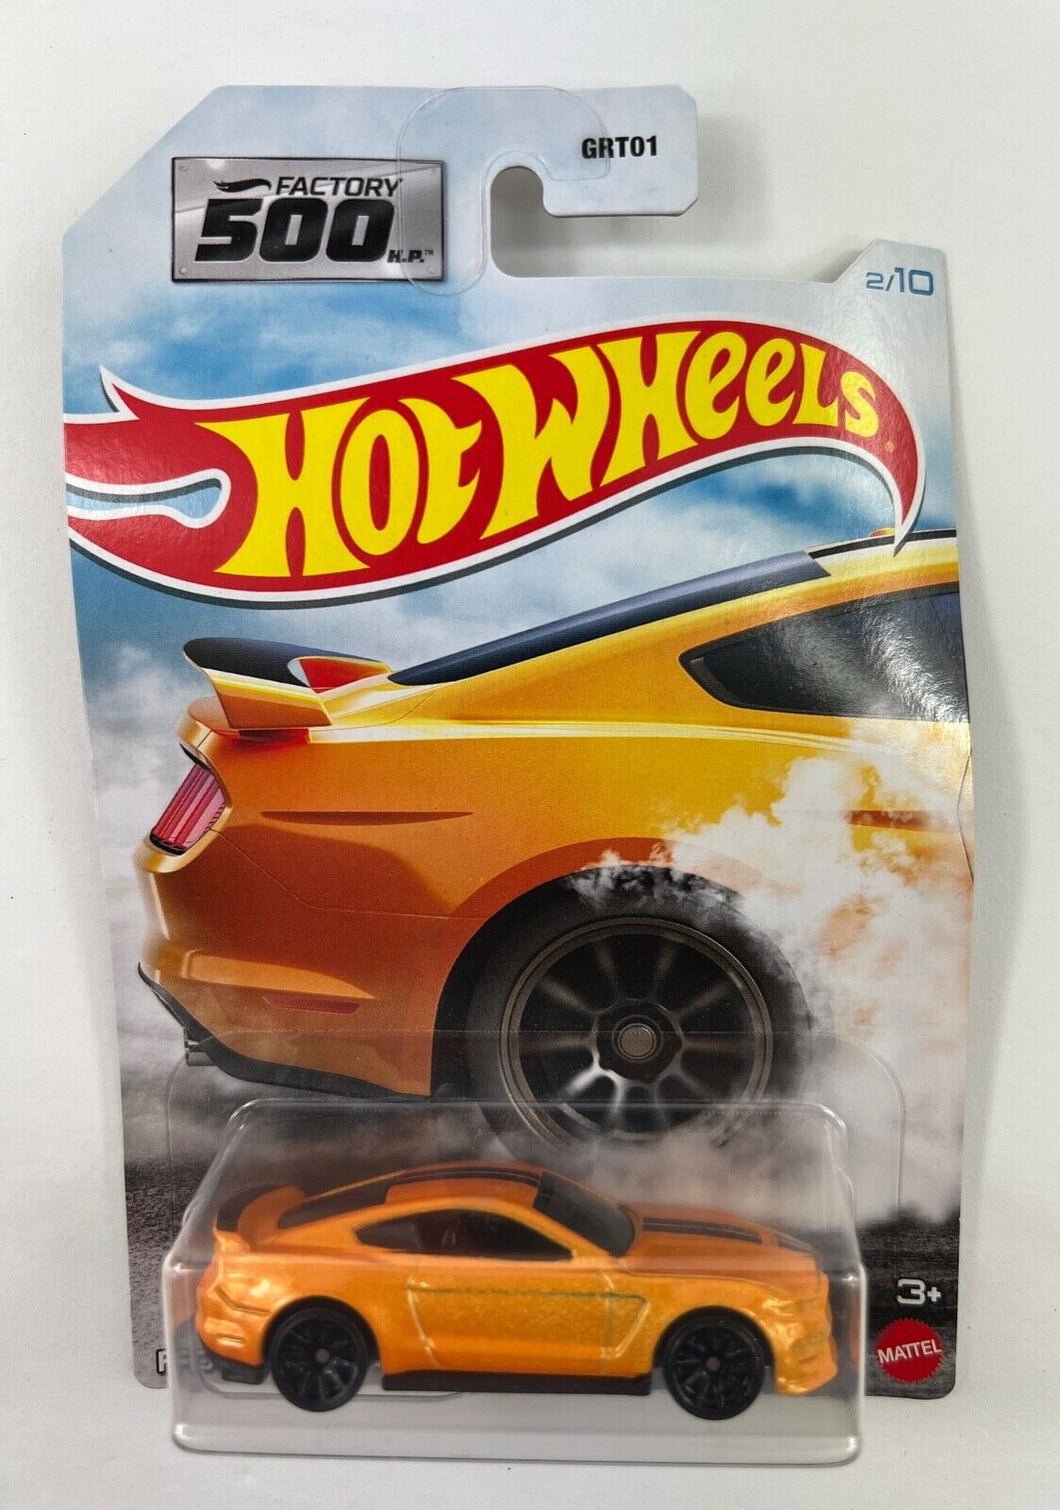 Hot Wheels Ford Shelby GT350R Factory 500 H.P.